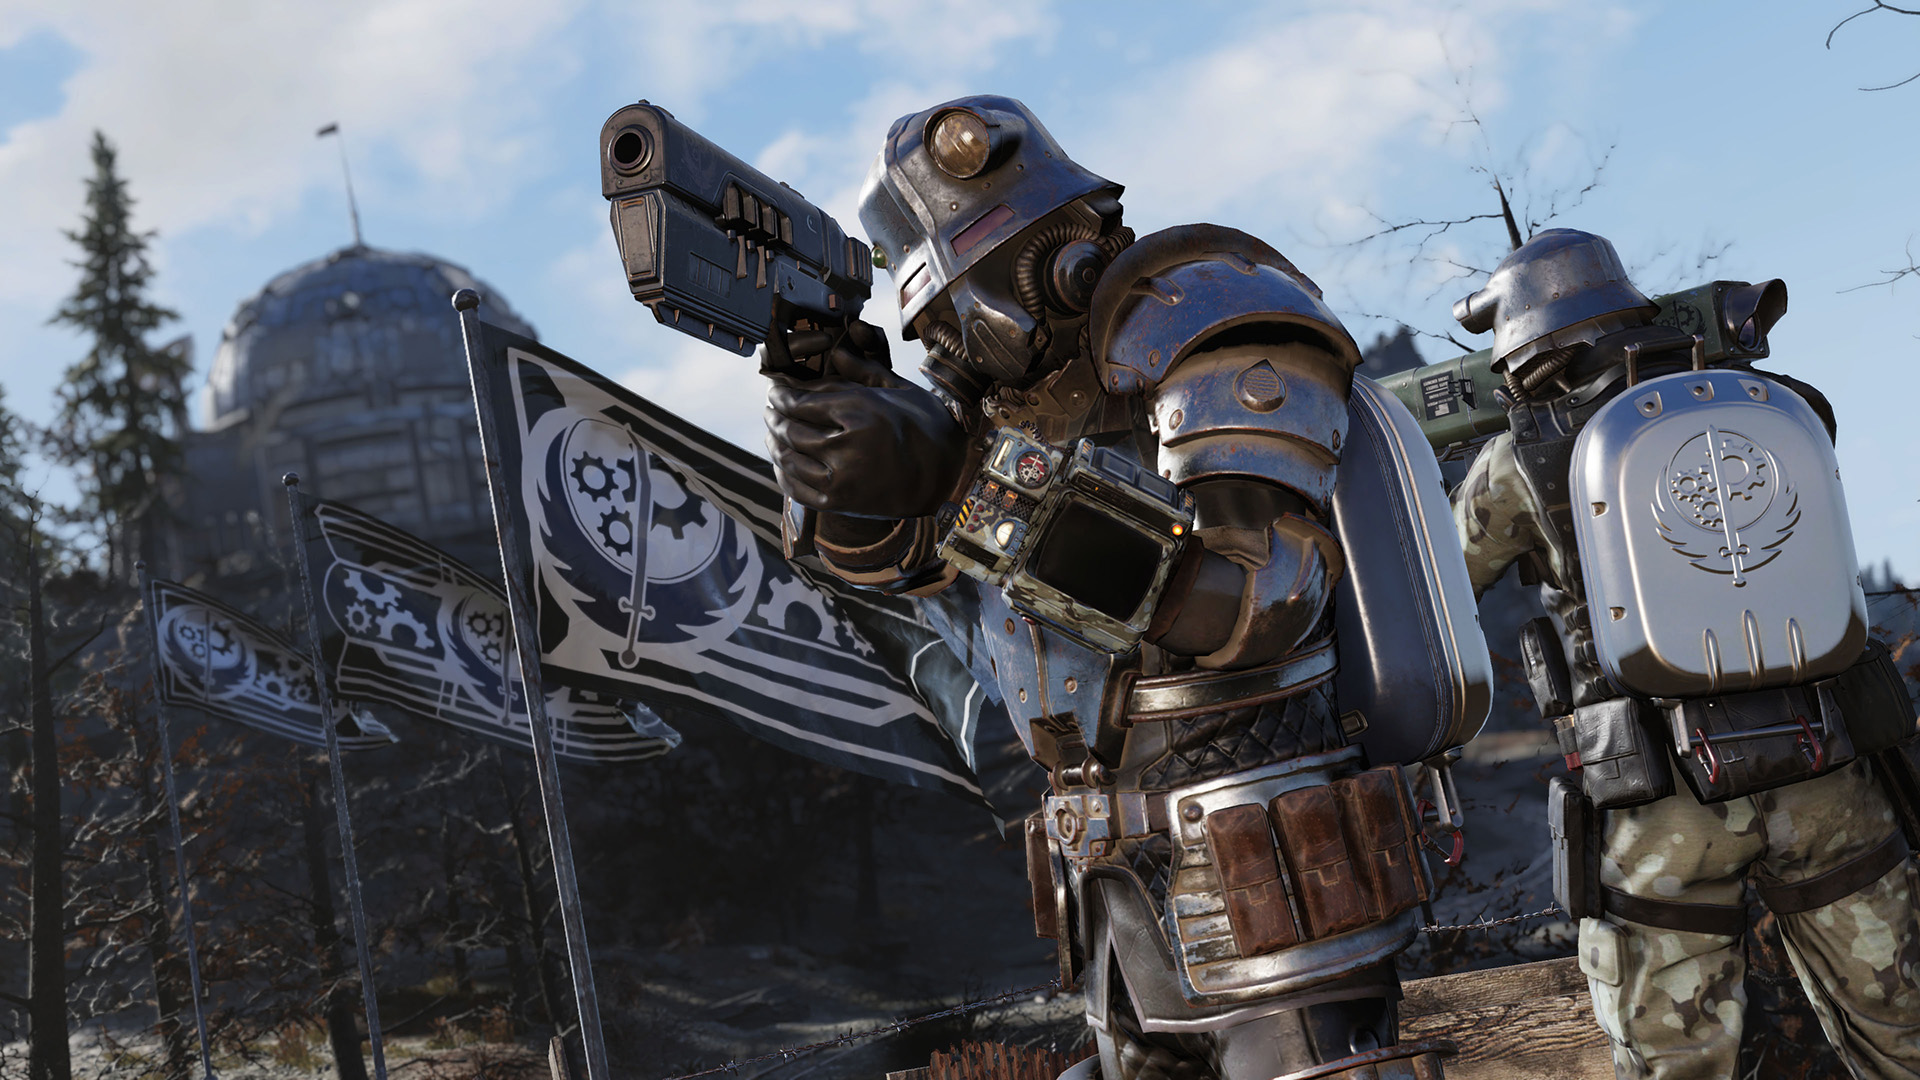 Fallout 76 is Dropping Its Battle Royale Mode